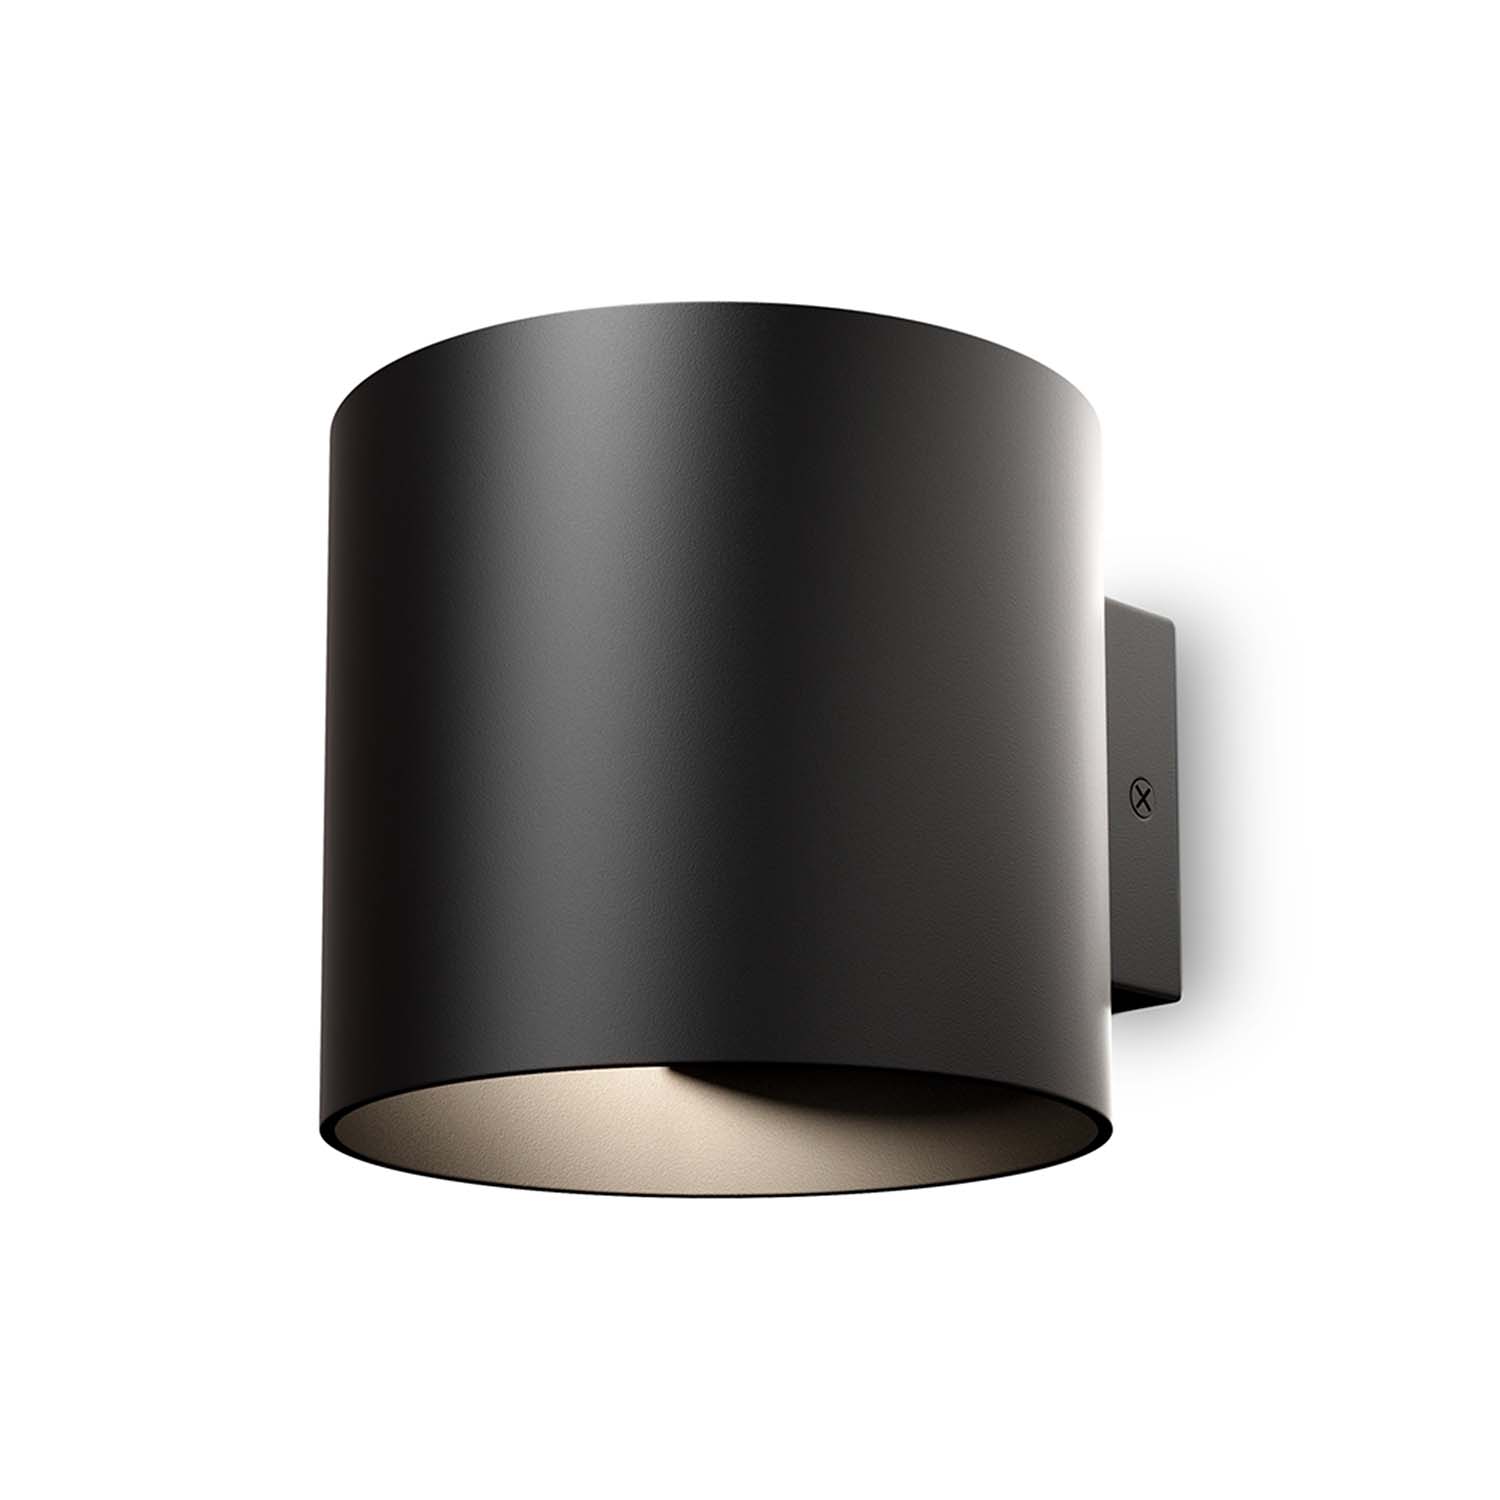 ROND - Design cylindrical wall light, black, white or gold